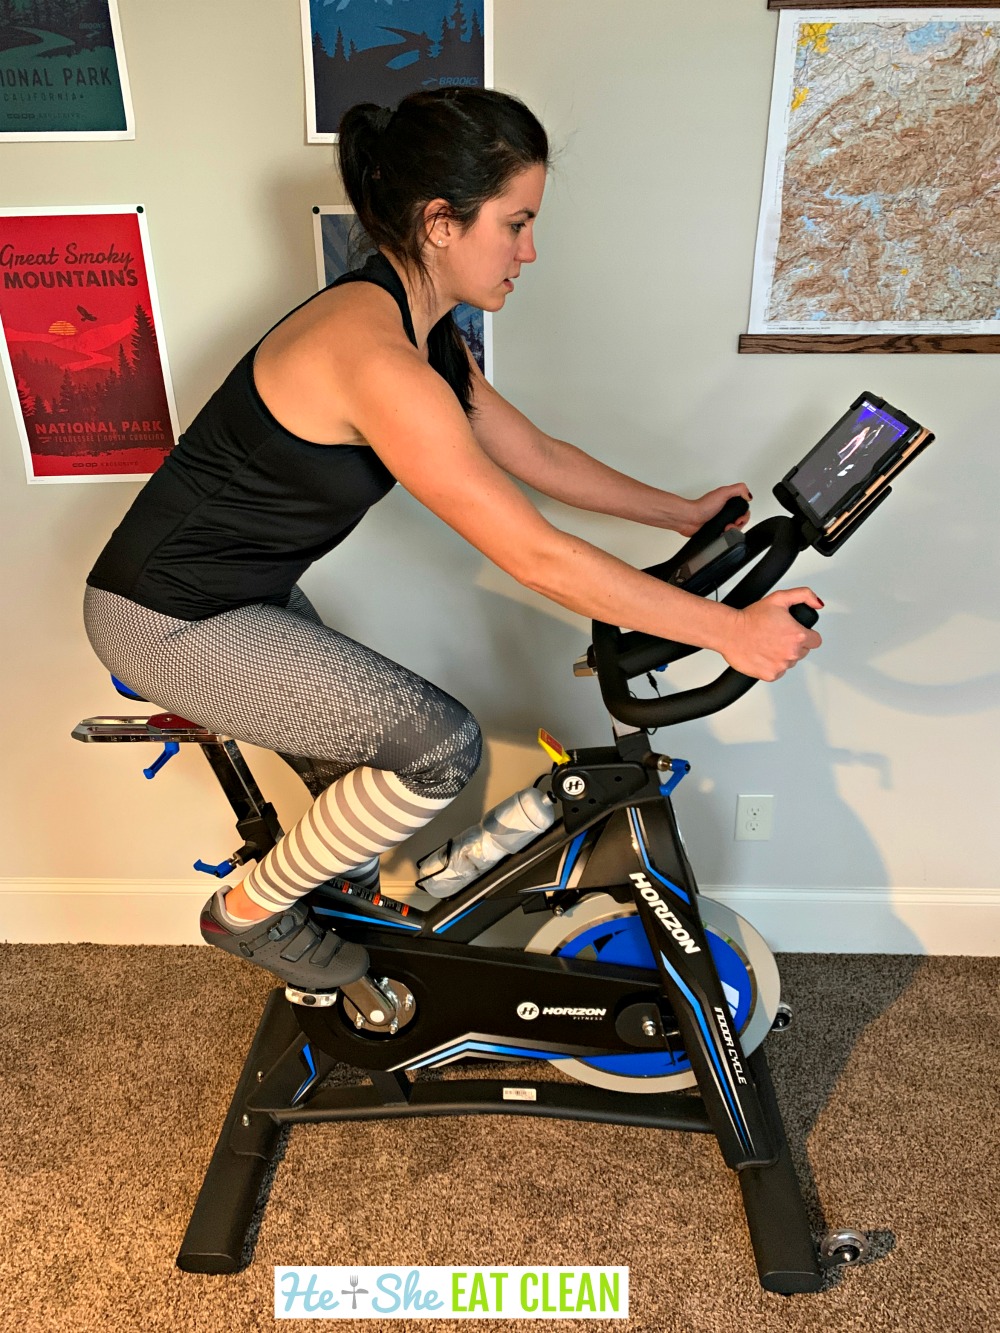 30 Minute Indoor Spinning Workout